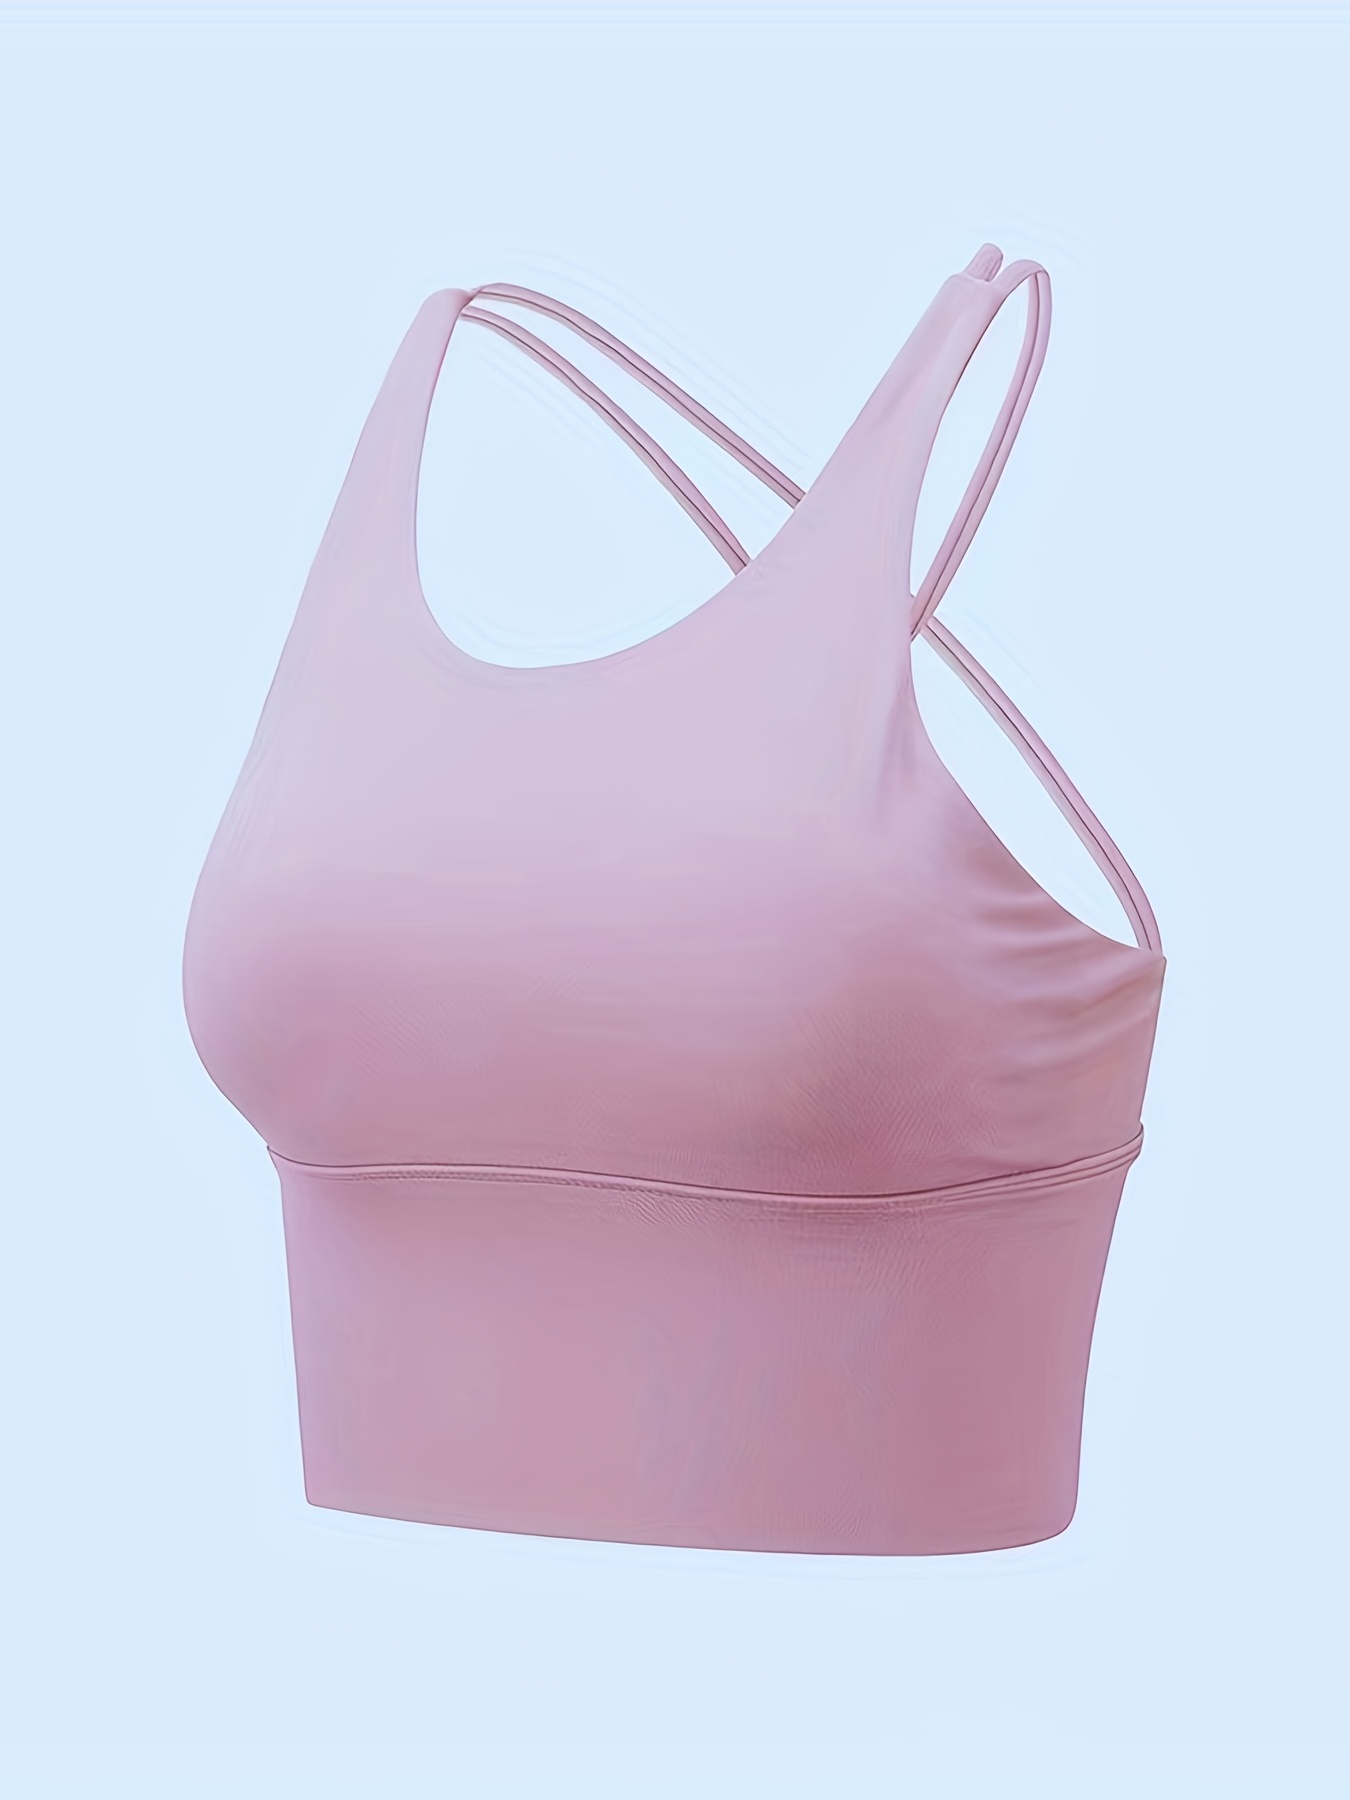 RQYYD Plus Size Sports Bras with Zipper Front Medium High Impact Support  Strappy Criss Cross Back Workout Bra Tops Pink XXL